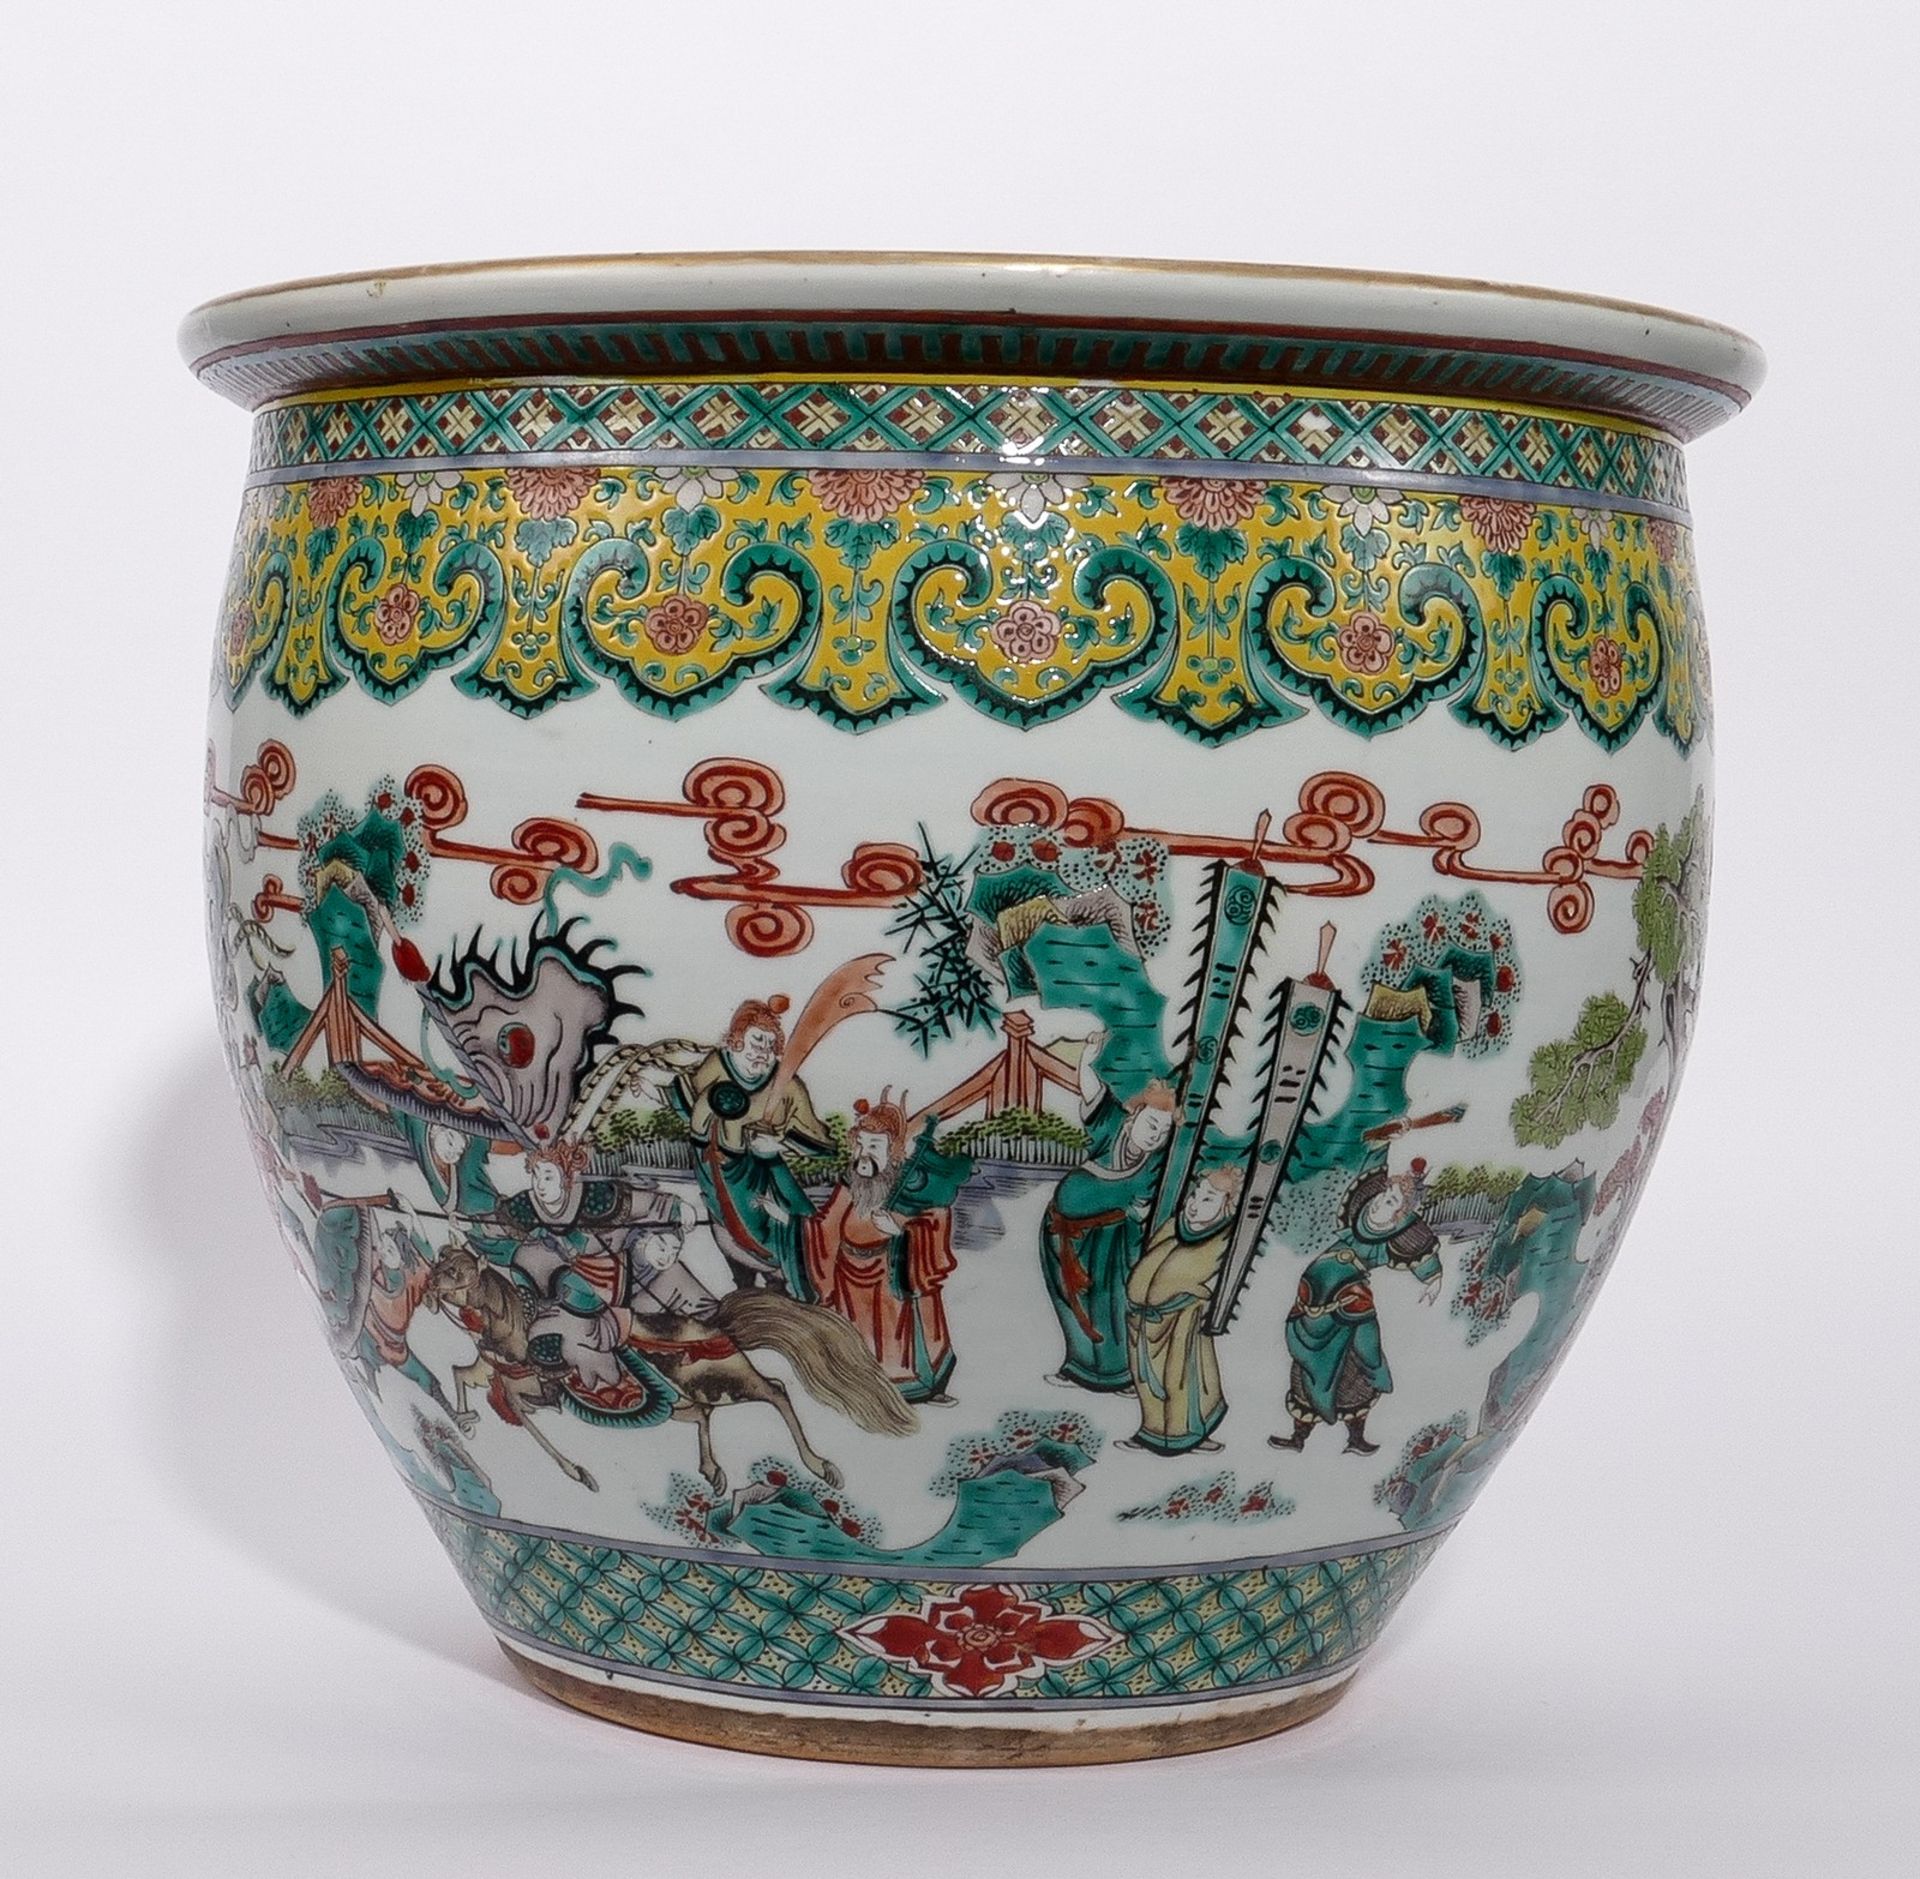 A Chinese famille verte fish bowl, decorated with a court scene and warriors, H 35,5 - Diameter 41 - Bild 5 aus 8